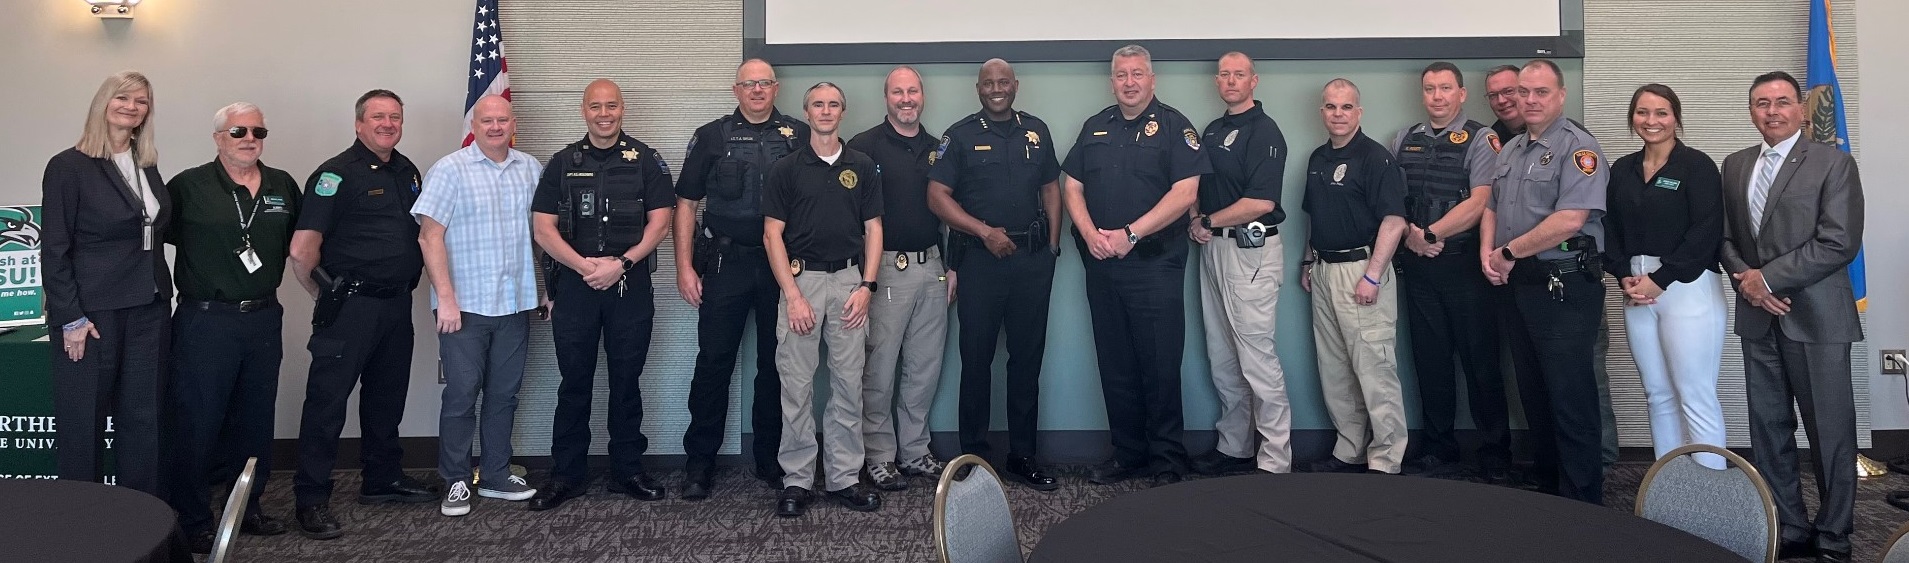 From Right to Left: Dr. Rebekah Doyle, Dr. Mike Wilds, Chief Cox of Claremore Police, Claremore Police Department, Tulsa Police Department, Oklahoma State Bureau of Investigation, Chief Franklin of Tulsa Police, Chief Berryhill of Broken Arrow Police, Jenks Police Department, Tulsa County Sheriff's Office, Jessica Williams, Dean Eloy Chavez